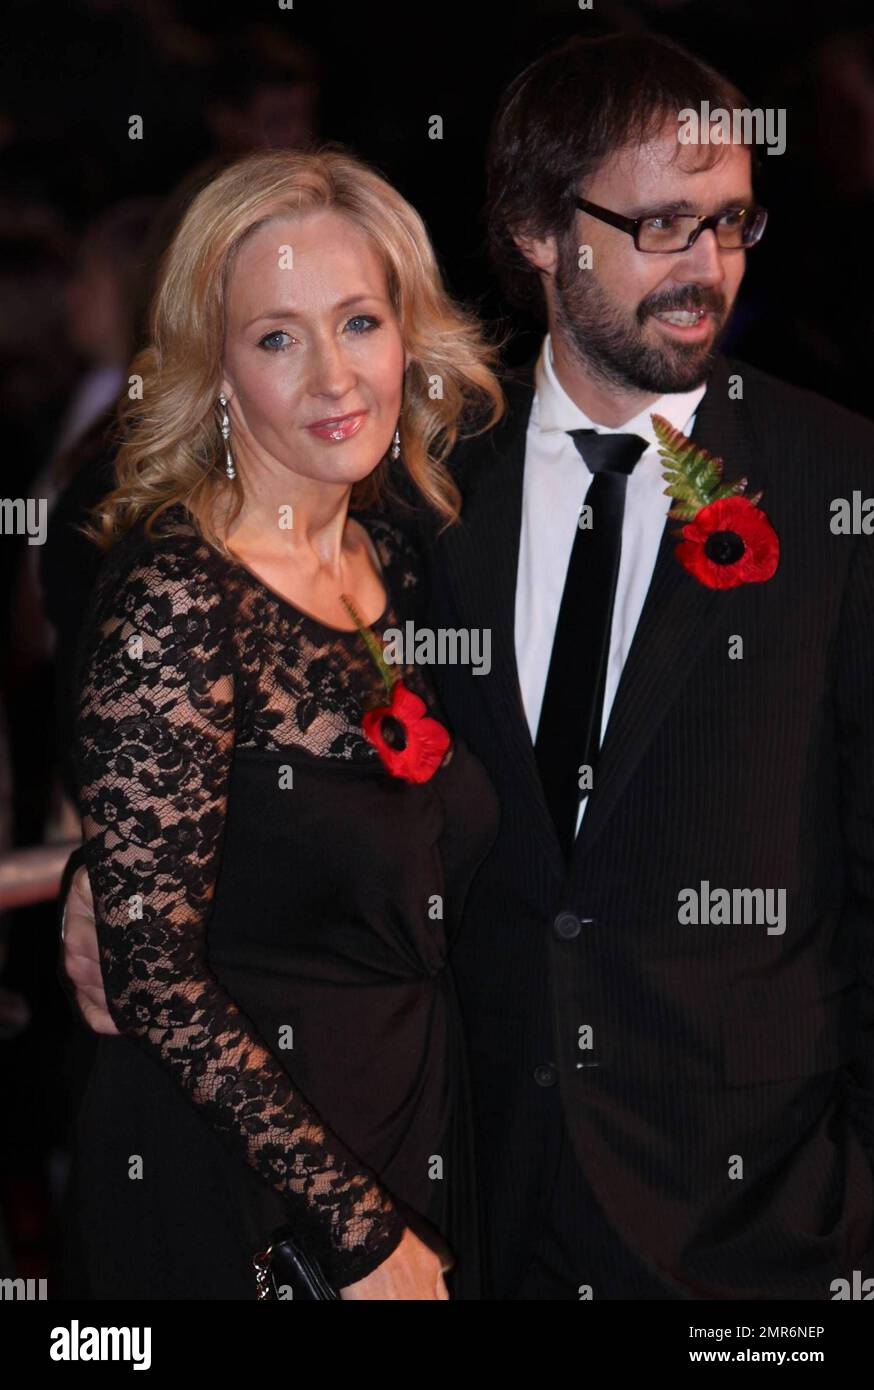 J. K. Rowling and Dr. Neil Murray pose on the red carpet at the world premiere of Warner Bros. 'Harry Potter and the Deathly Hallows: Part 1' held at the Odeon West End in Leicester Square. London, UK. 11/11/10. Stock Photo